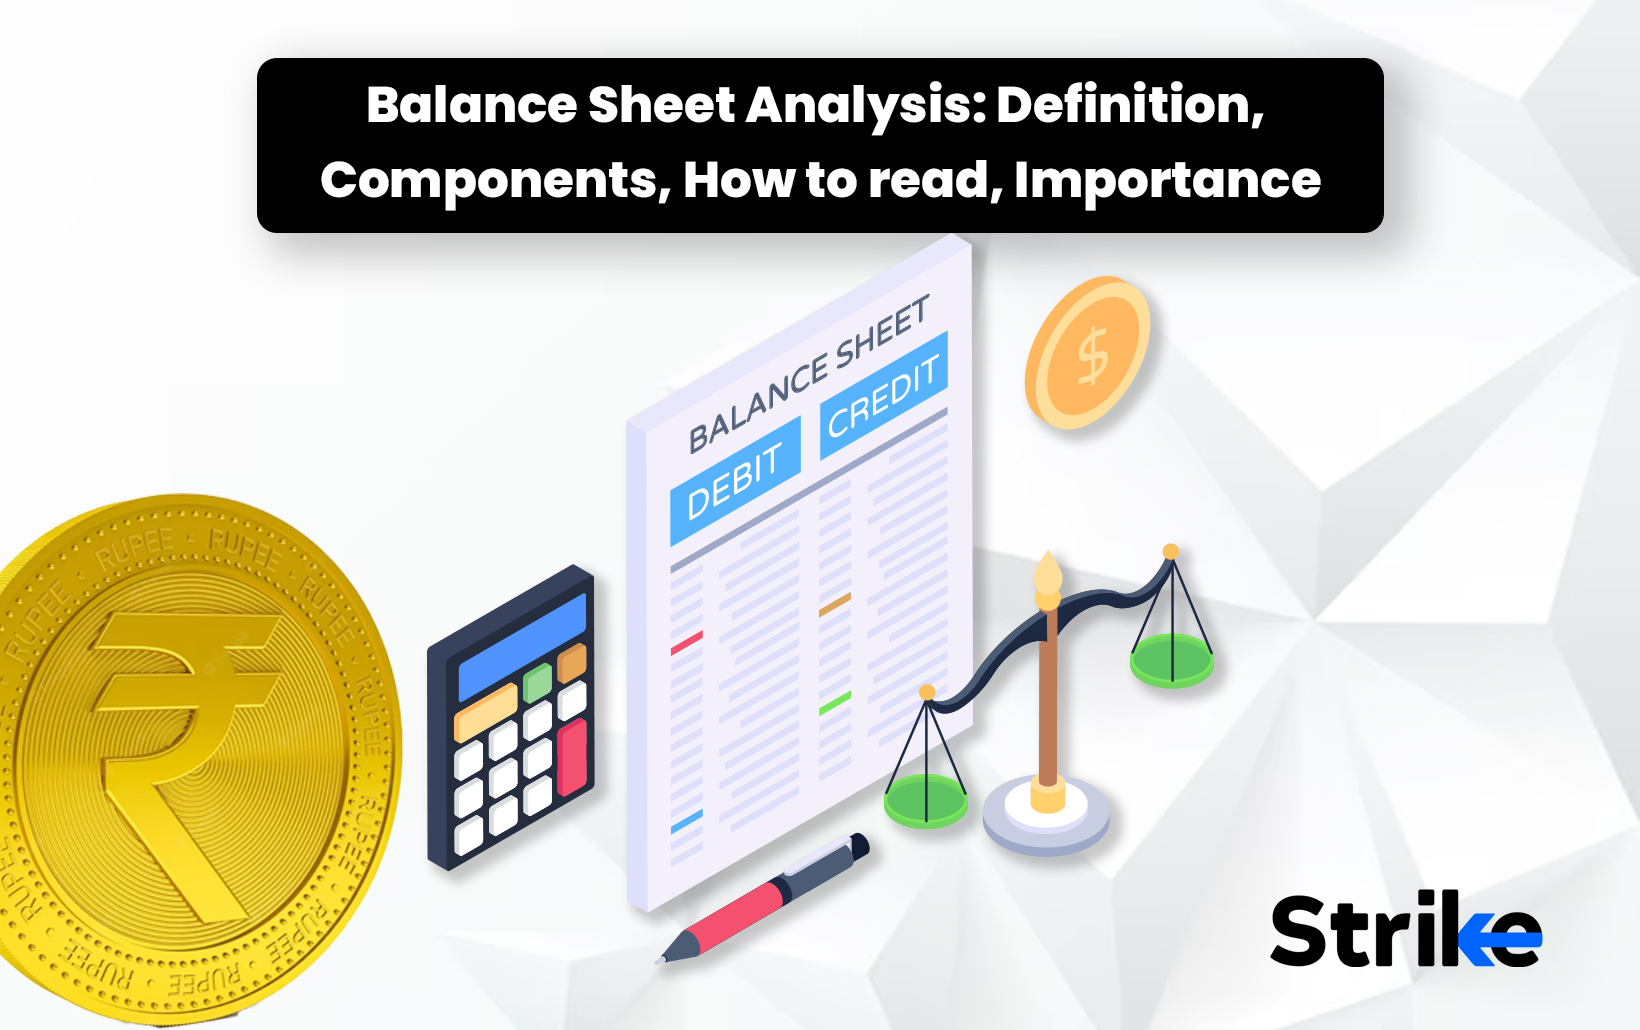 Balance Sheet Analysis: Definition, Components, How to read, Importance